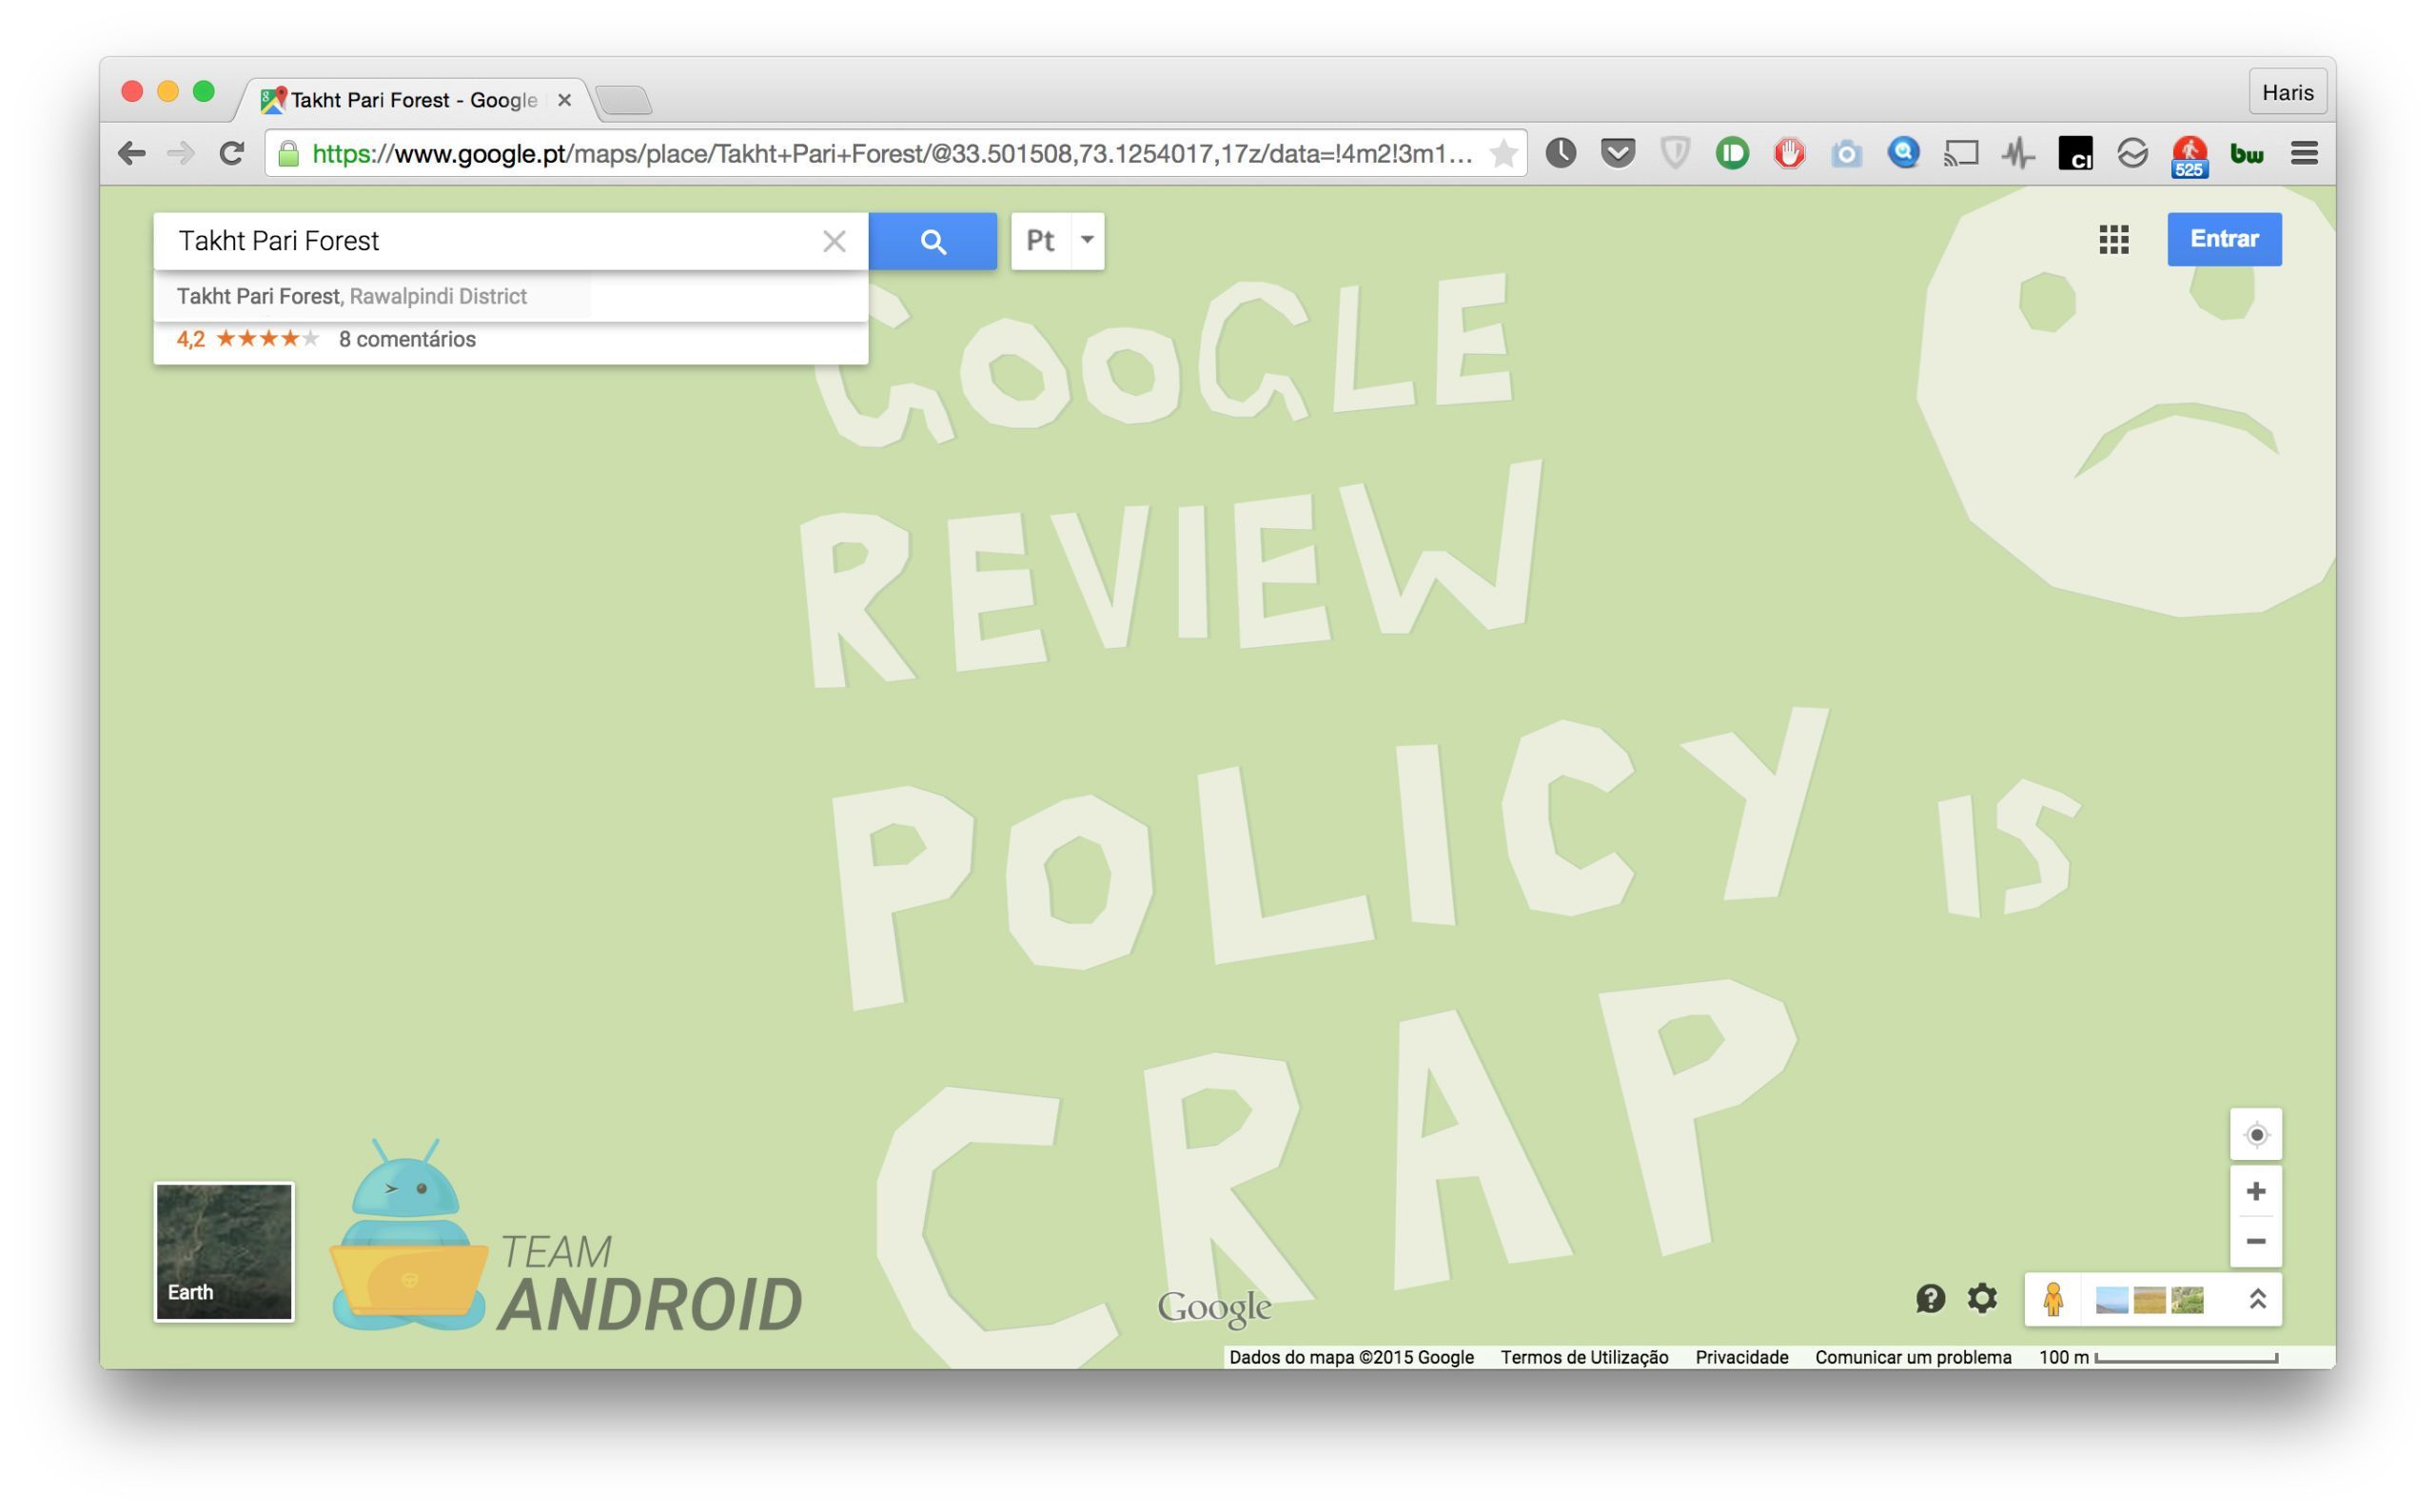 Google-Review-Policy-Google-Maps